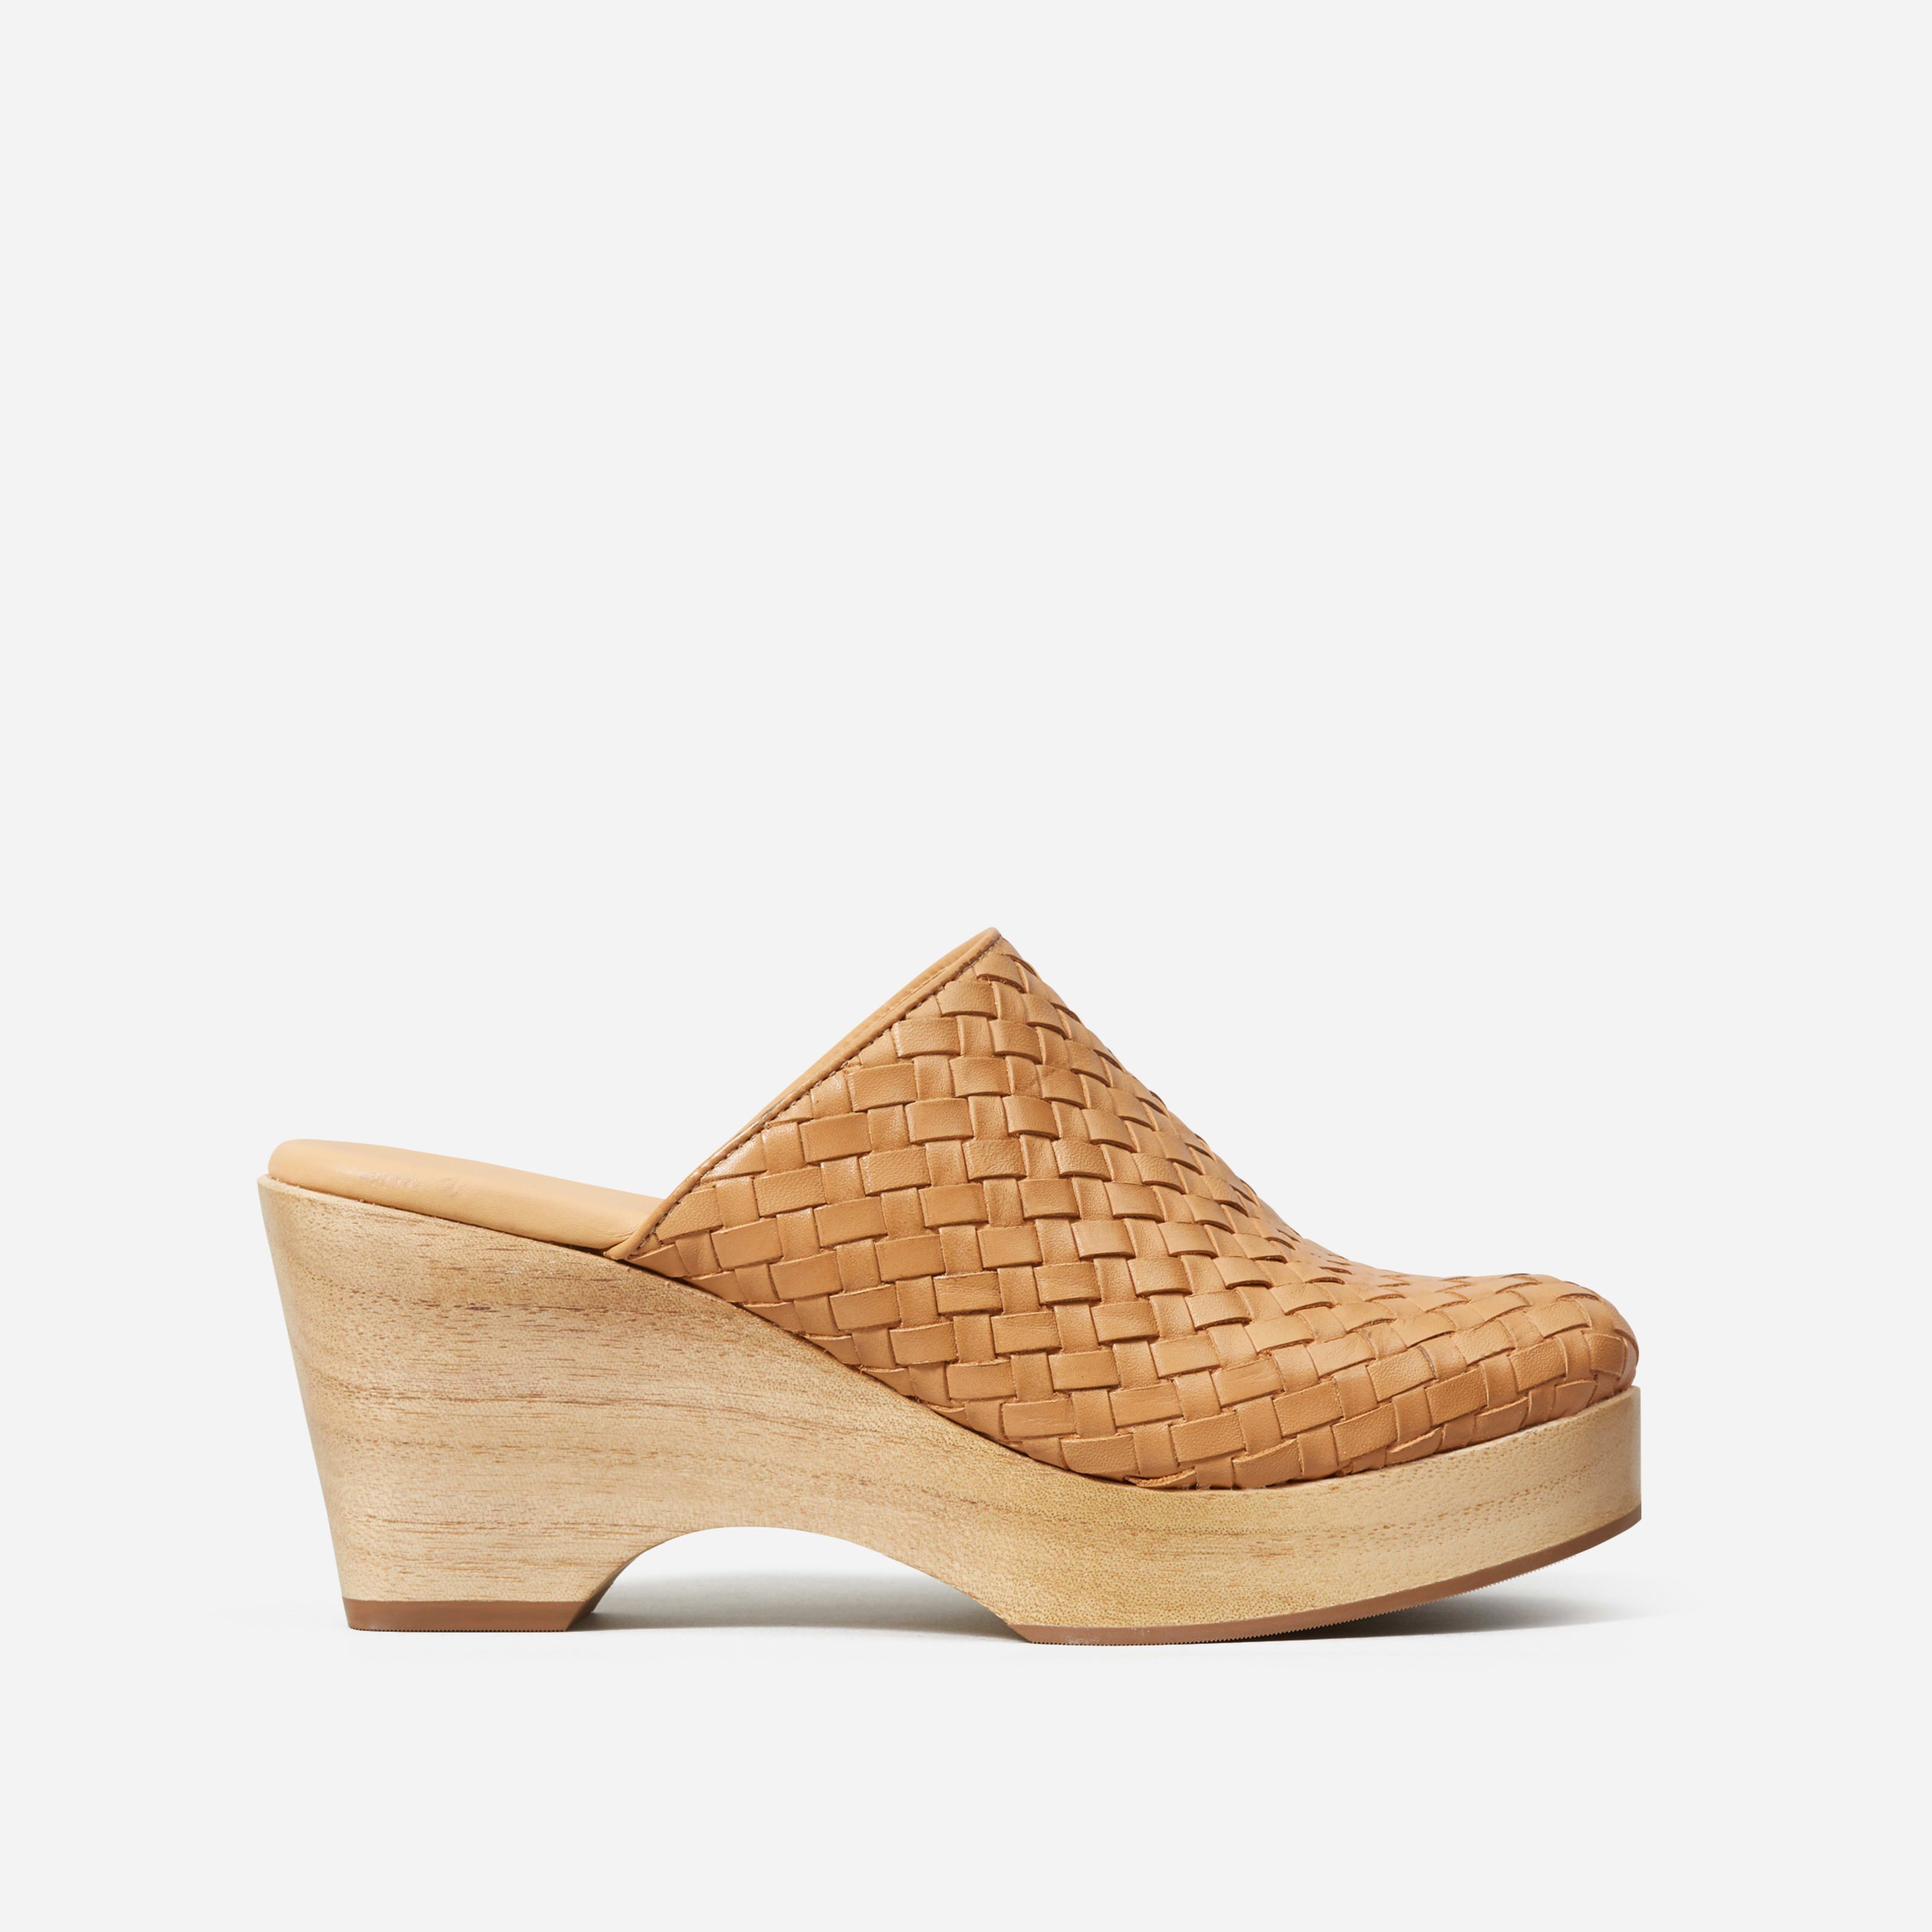 Clog by Everlane in Tan Woven, Size 10.5 | Everlane